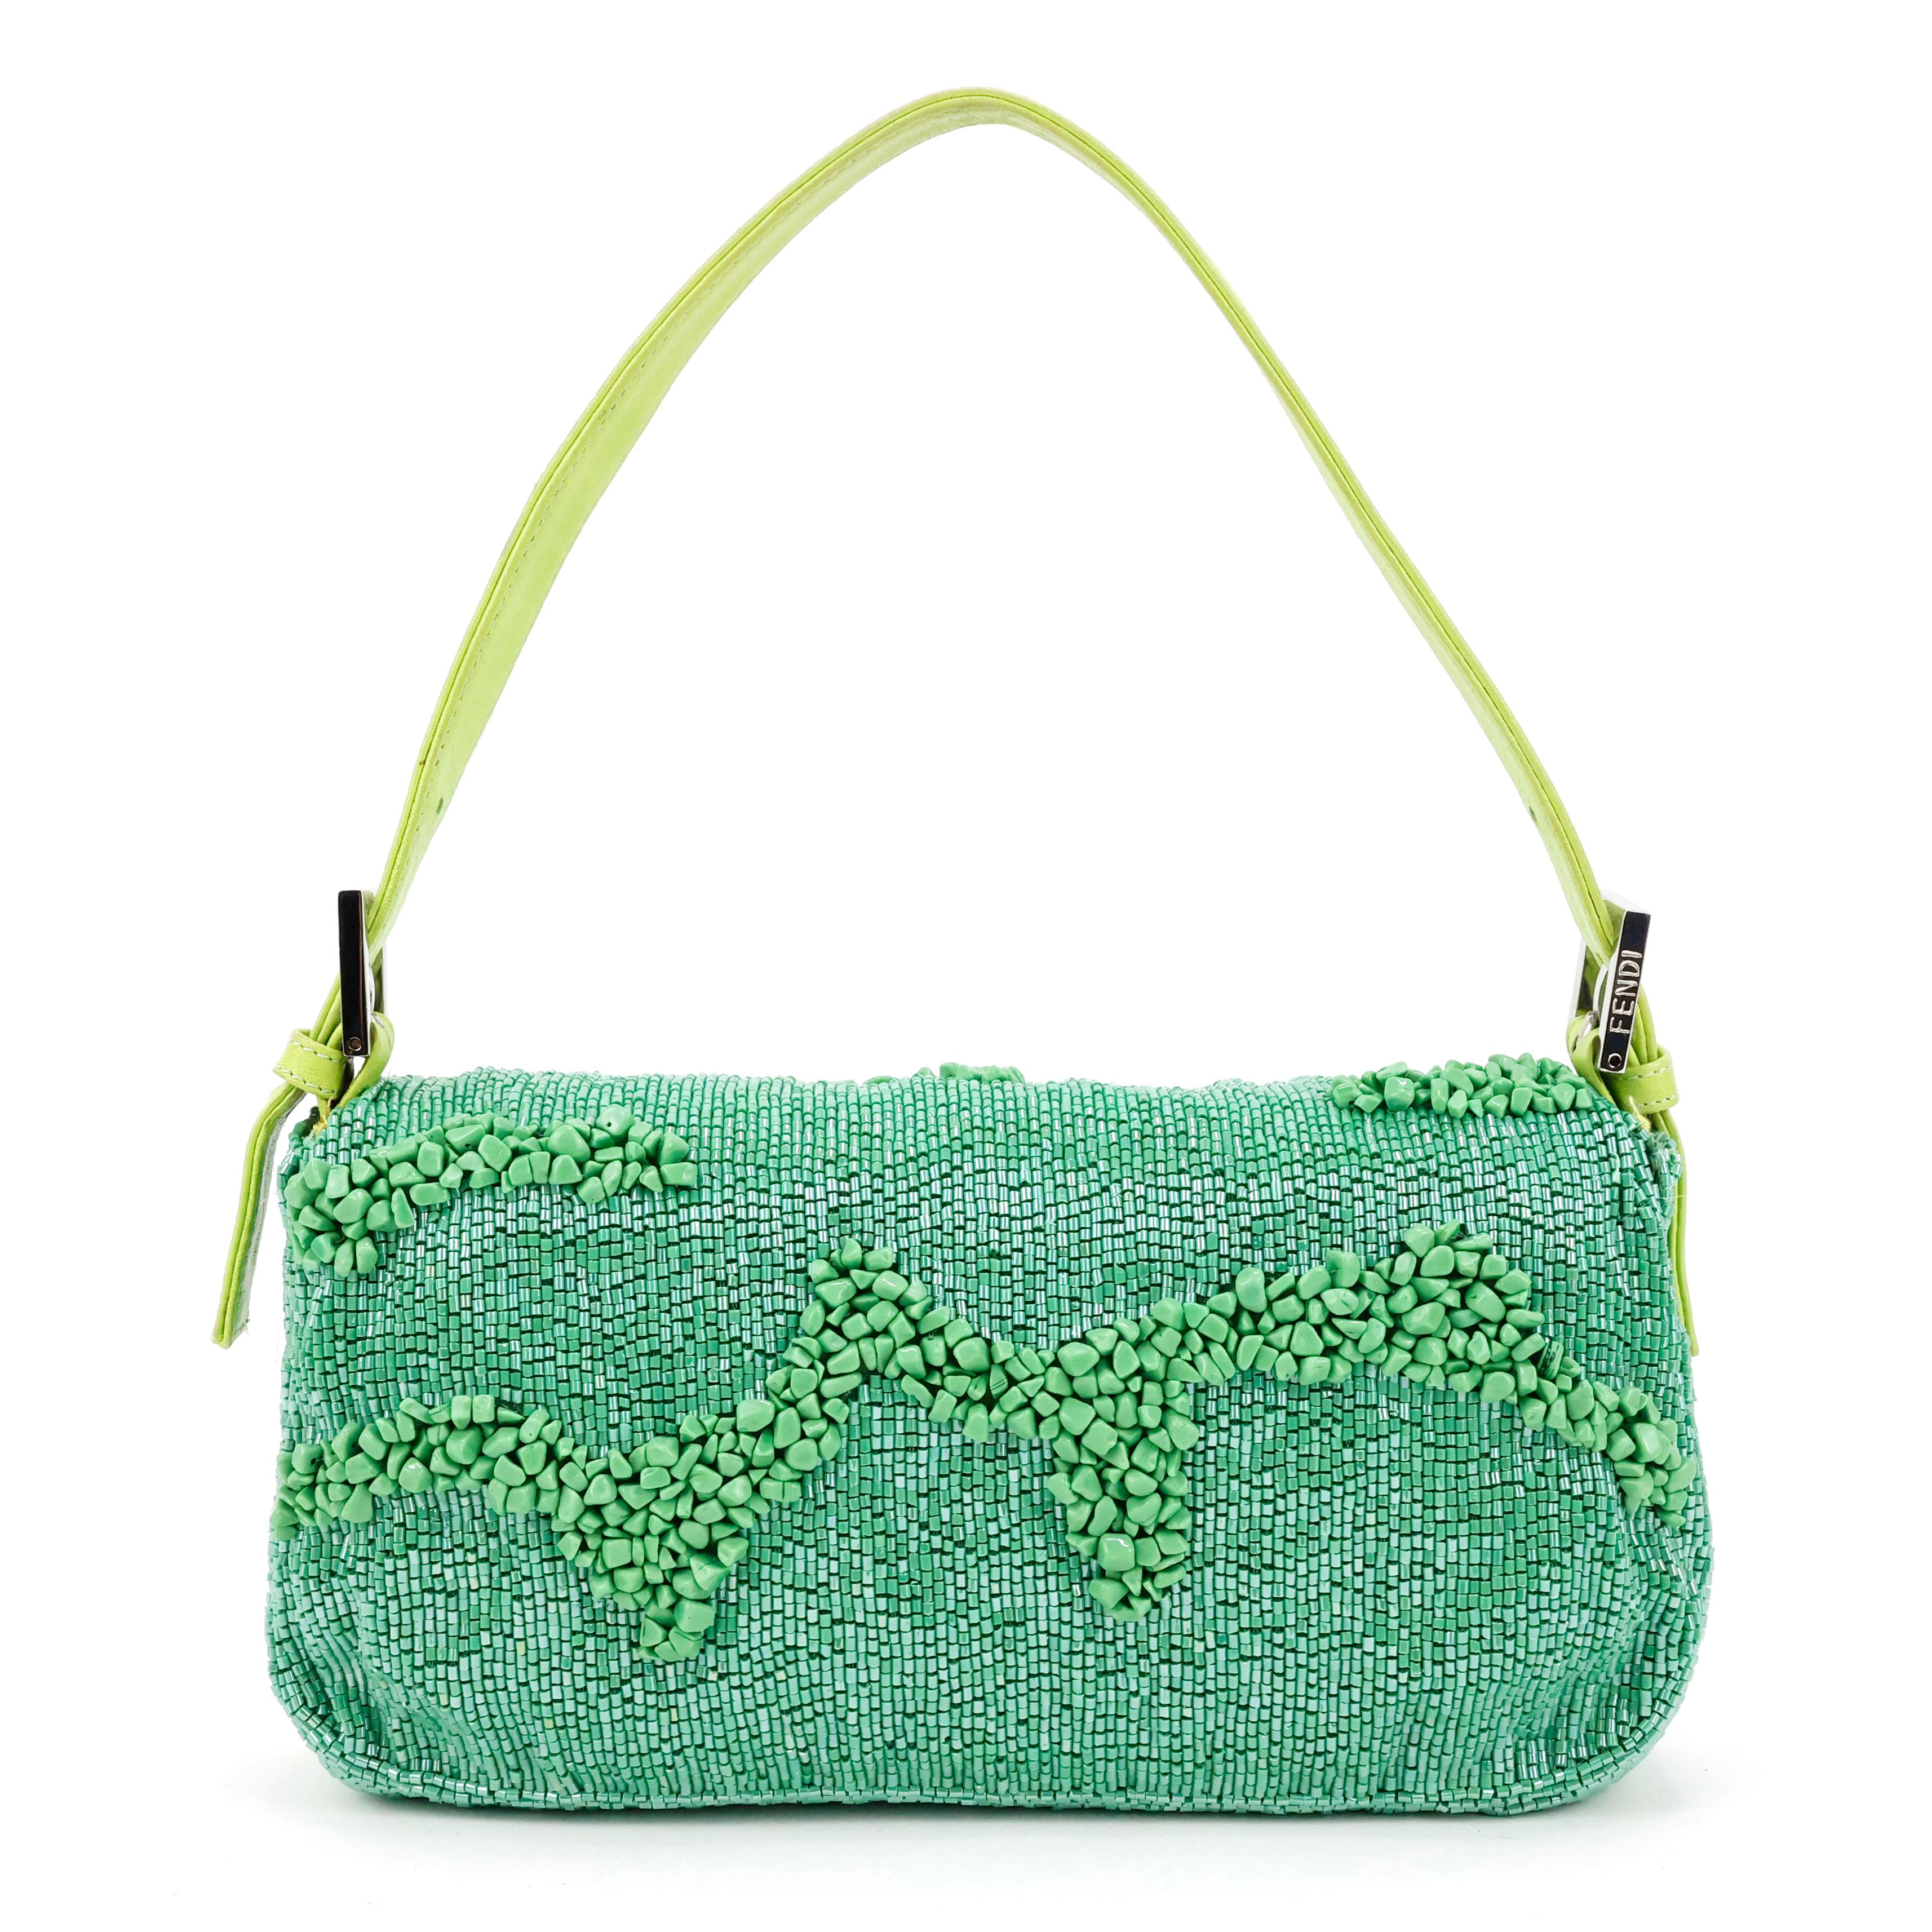 Rare Fendi multi-faceted embroidery and micro-beads Baguette from the Spring/Summer 2000 collection. The bag is embroidered all over with more than 16,000 green beads and 900 multifaceted tone on tone stones for an exquisitely fine three-dimensional